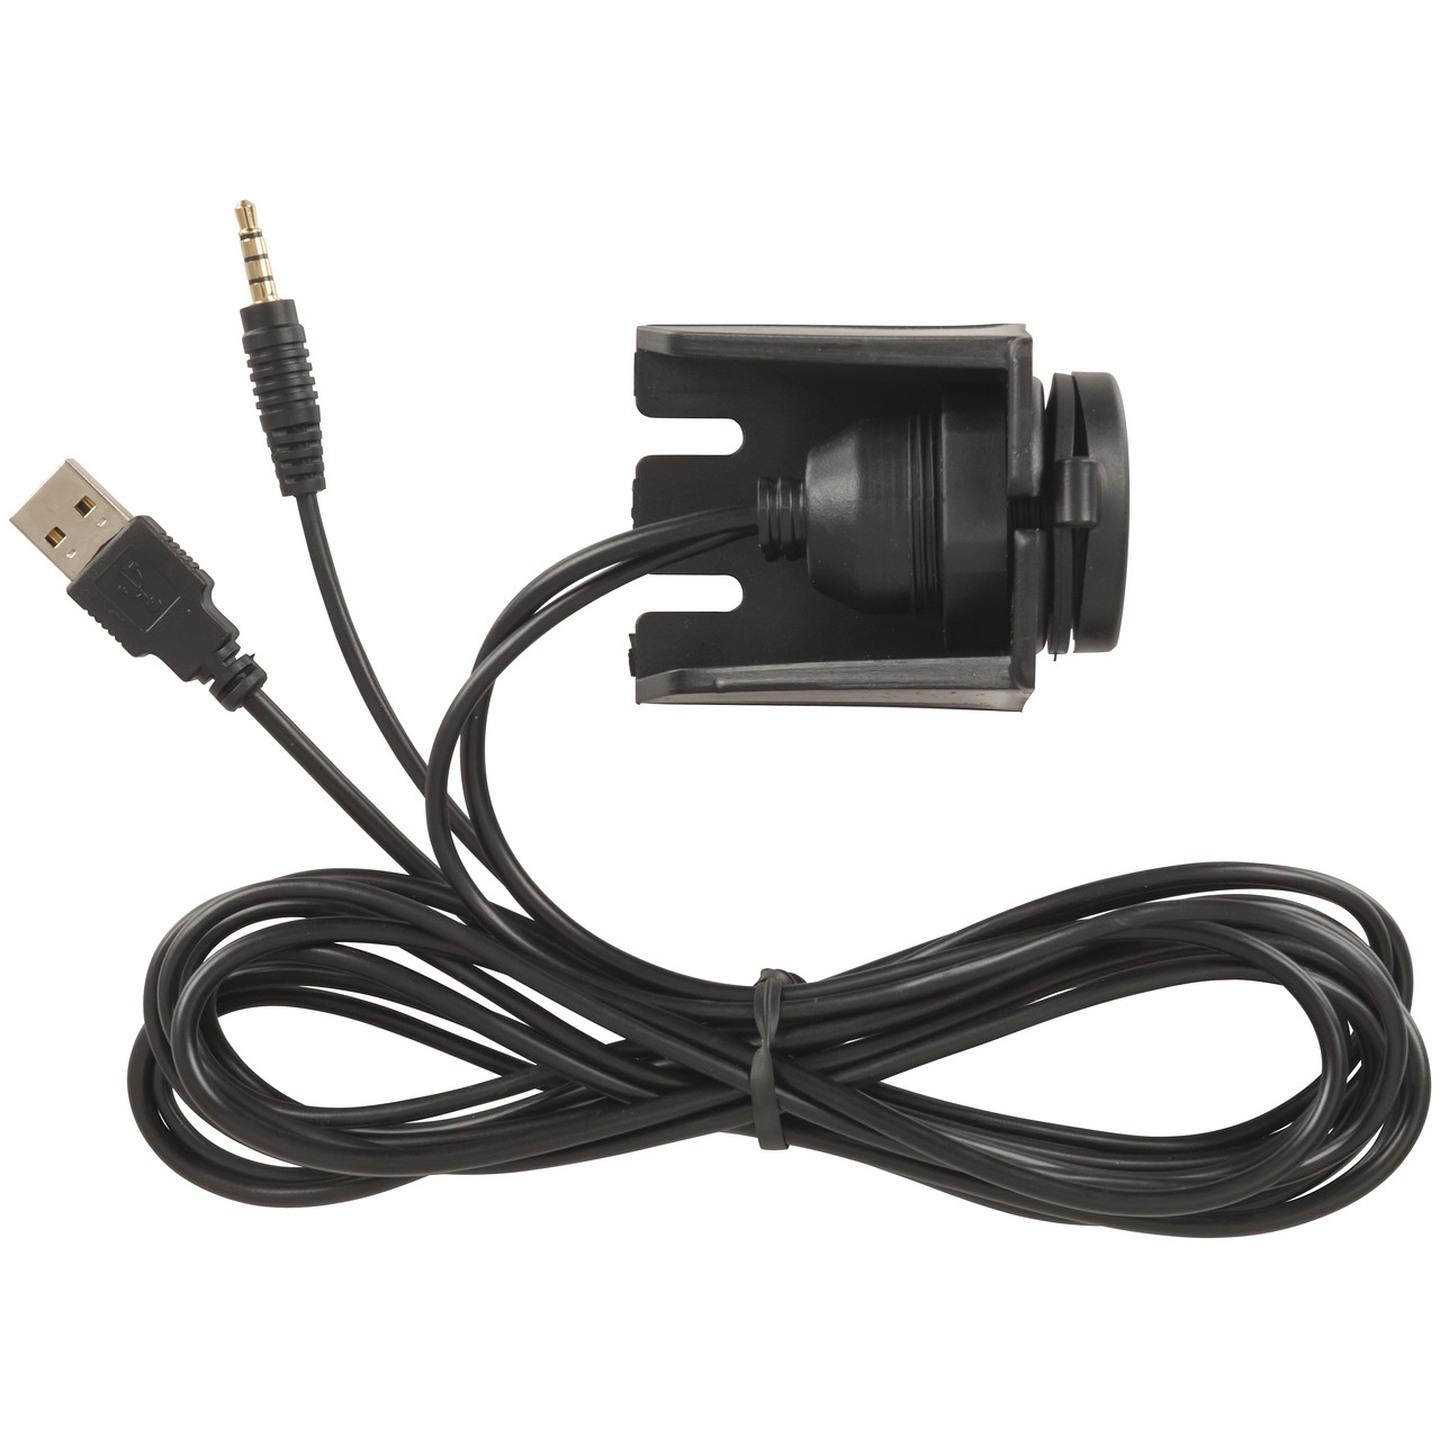 Powertech 3.5mm Auxiliary and USB Extension Cable with Mount